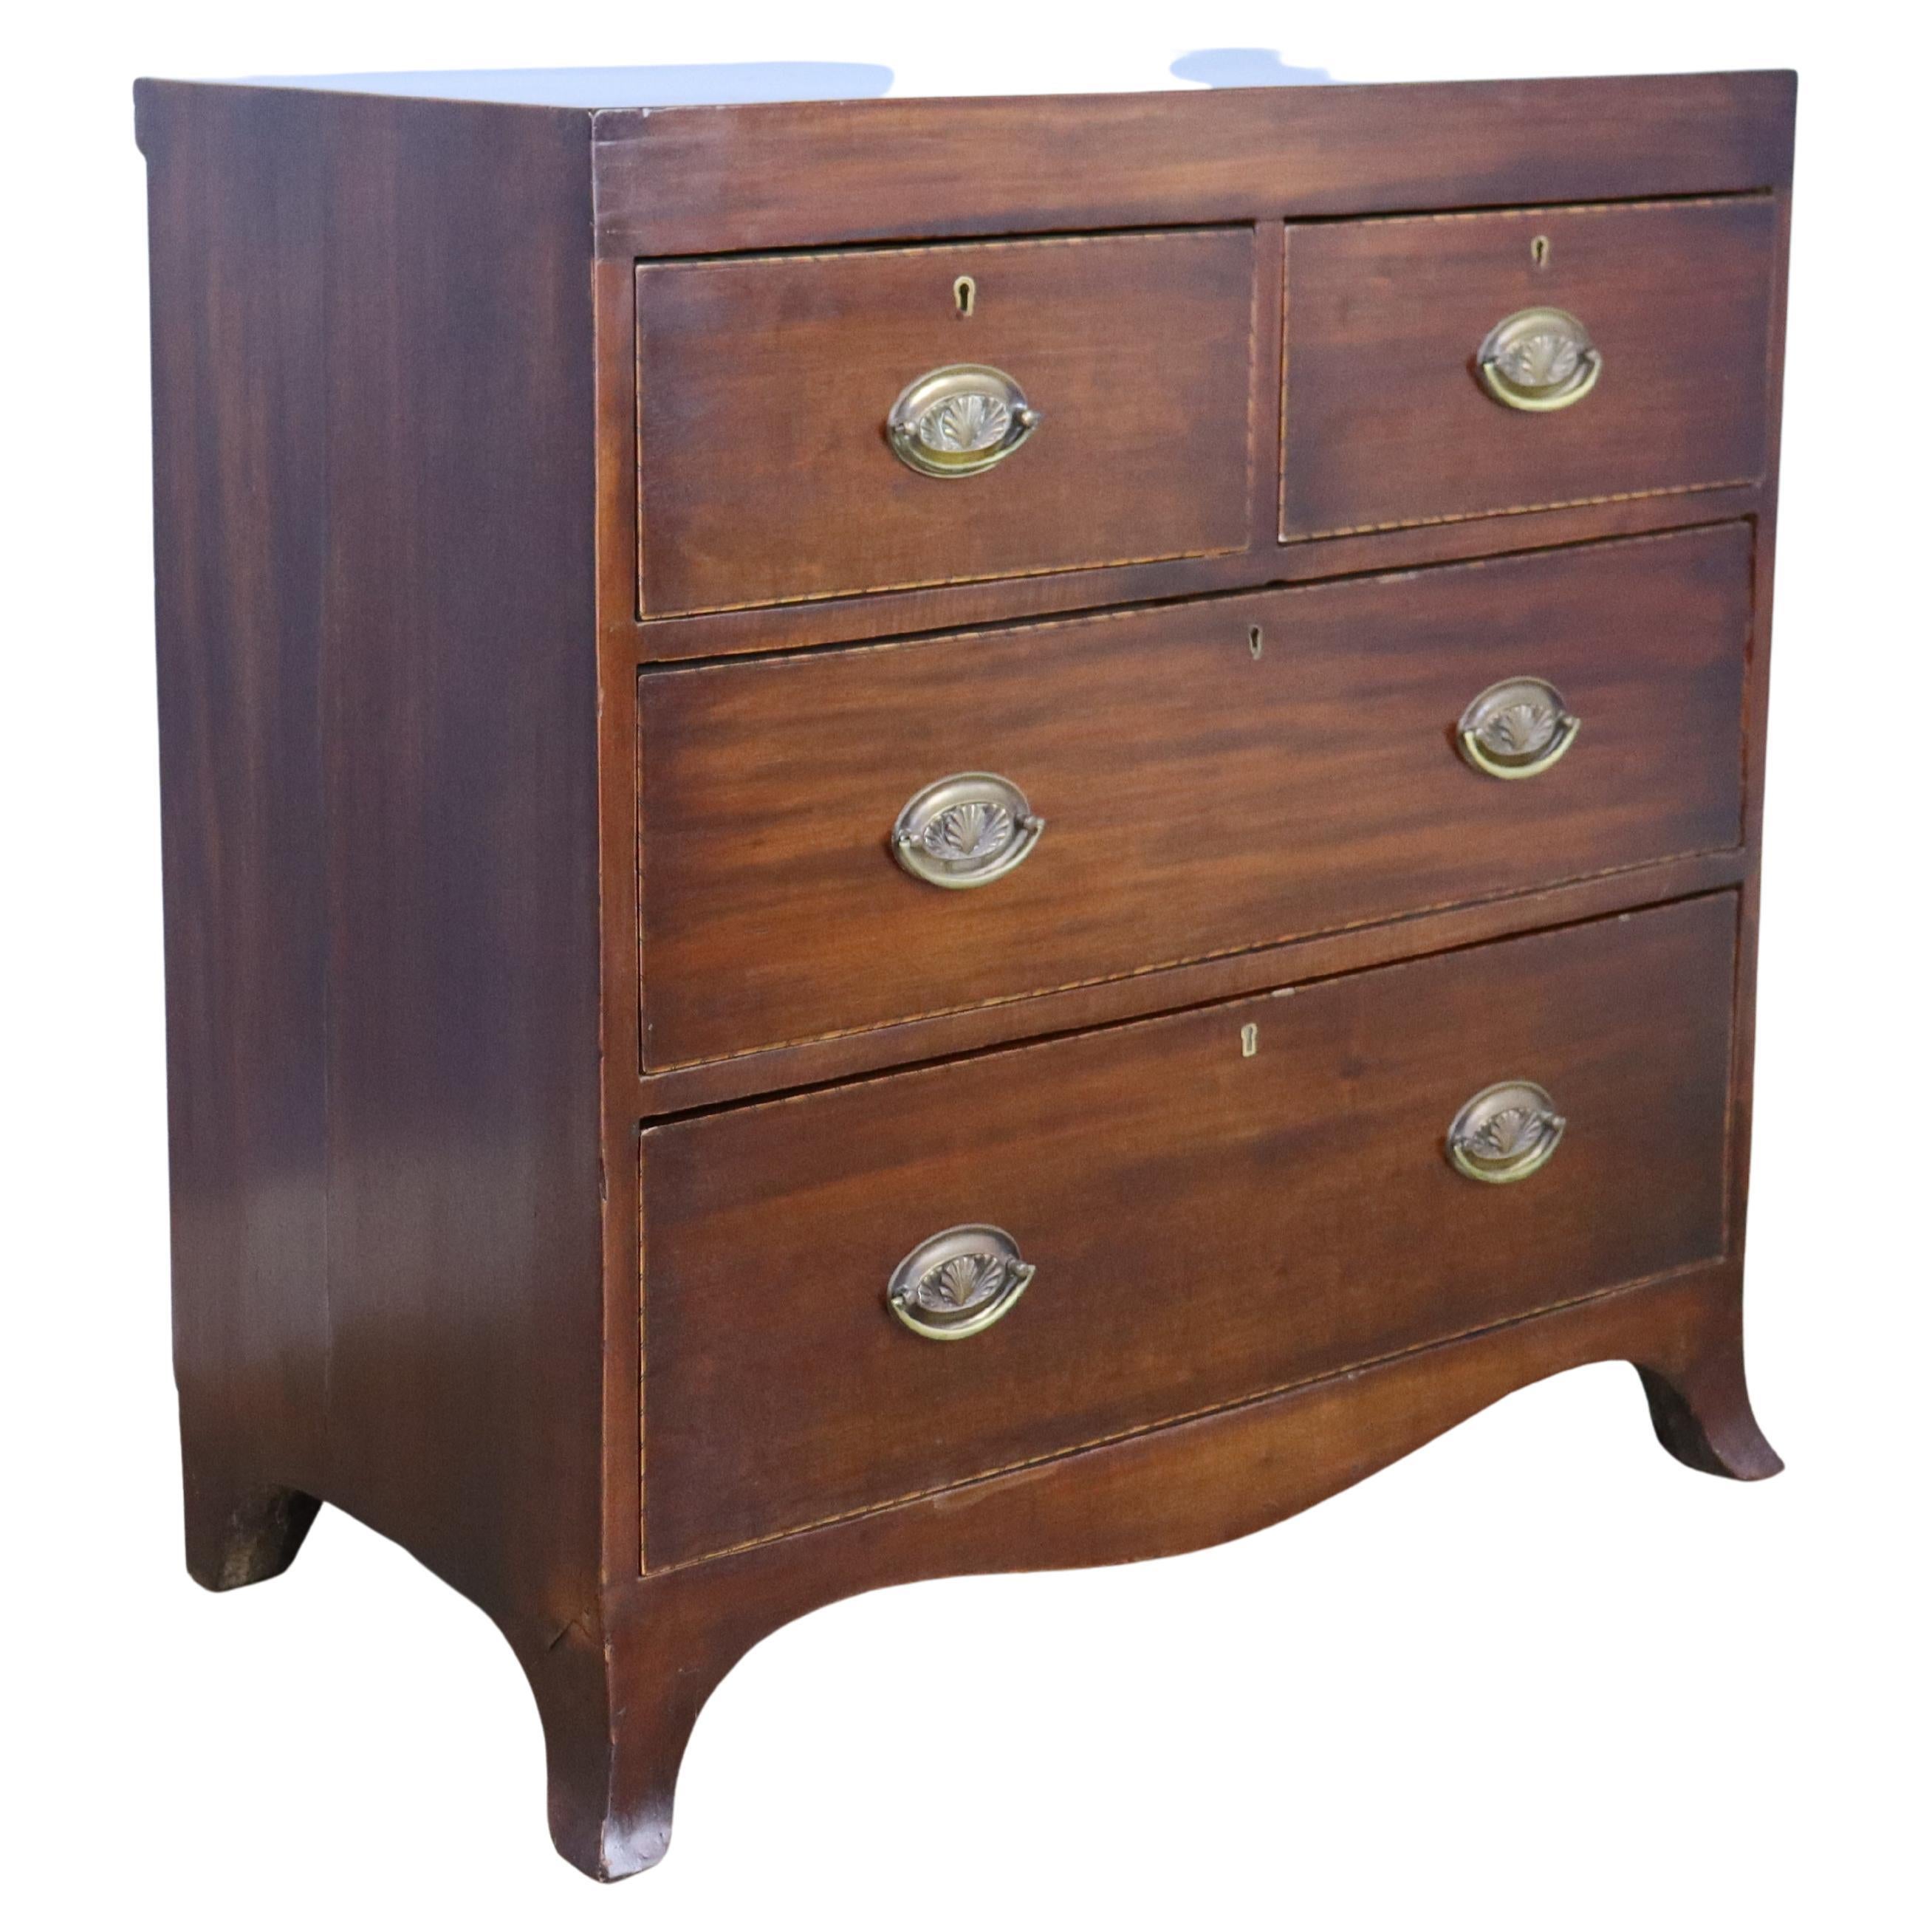 Regency Mahogany Chest of Drawers with Intricate Stringing